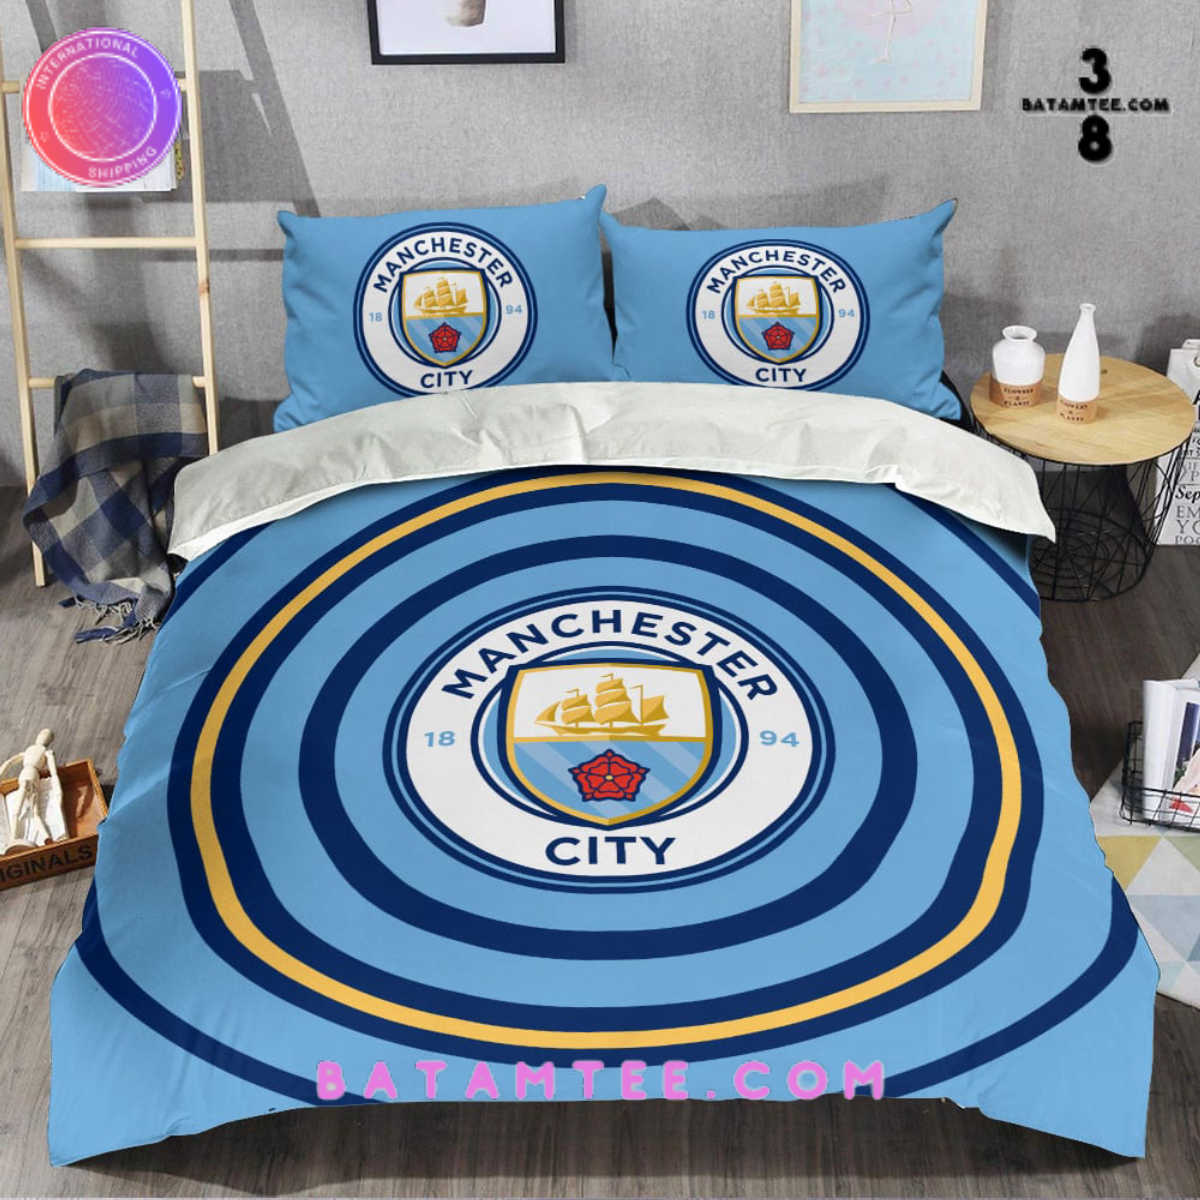 New Bedding Set collection for Manchester City FC fans-Limited Edition's Overview - Batamtee Shop - Threads & Totes: Your Style Destination